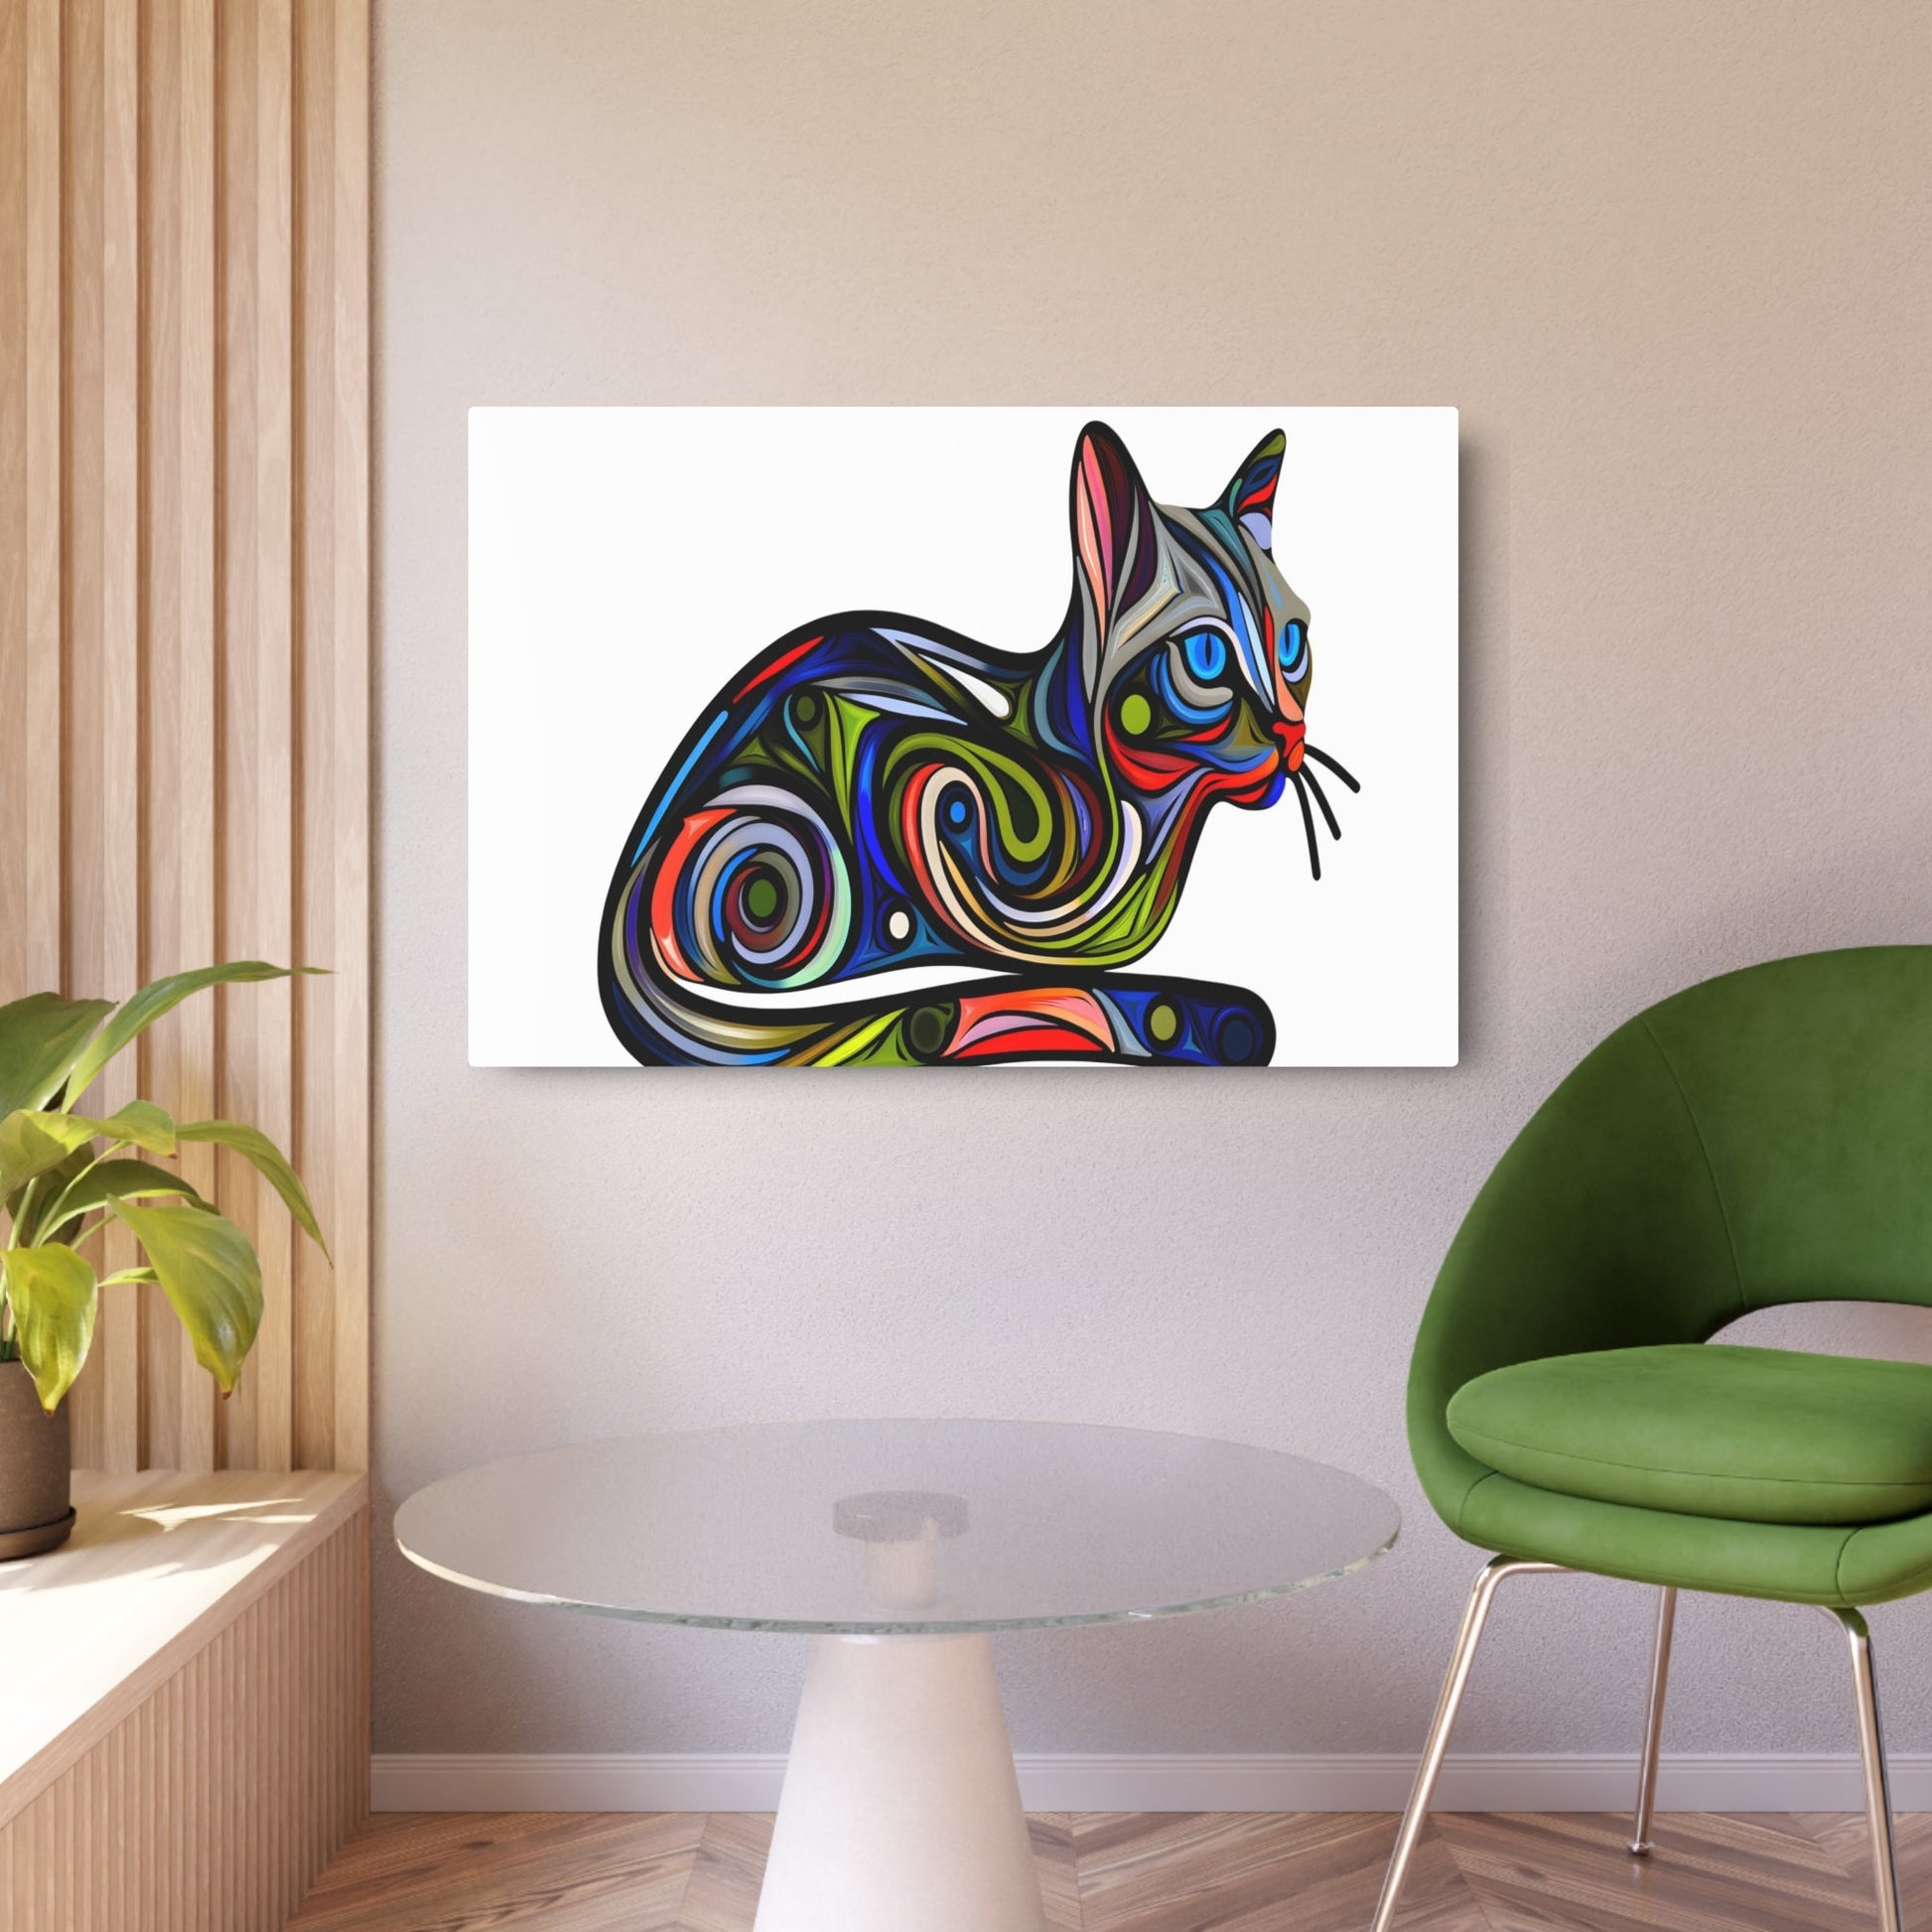 Metal Poster Art | "Vibrant & Intricate Digital Art: Modern & Contemporary Style Expressive Cat Image with Creative Patterns and Mysterious Playfulness" - Metal Poster Art 36″ x 24″ (Horizontal) 0.12''